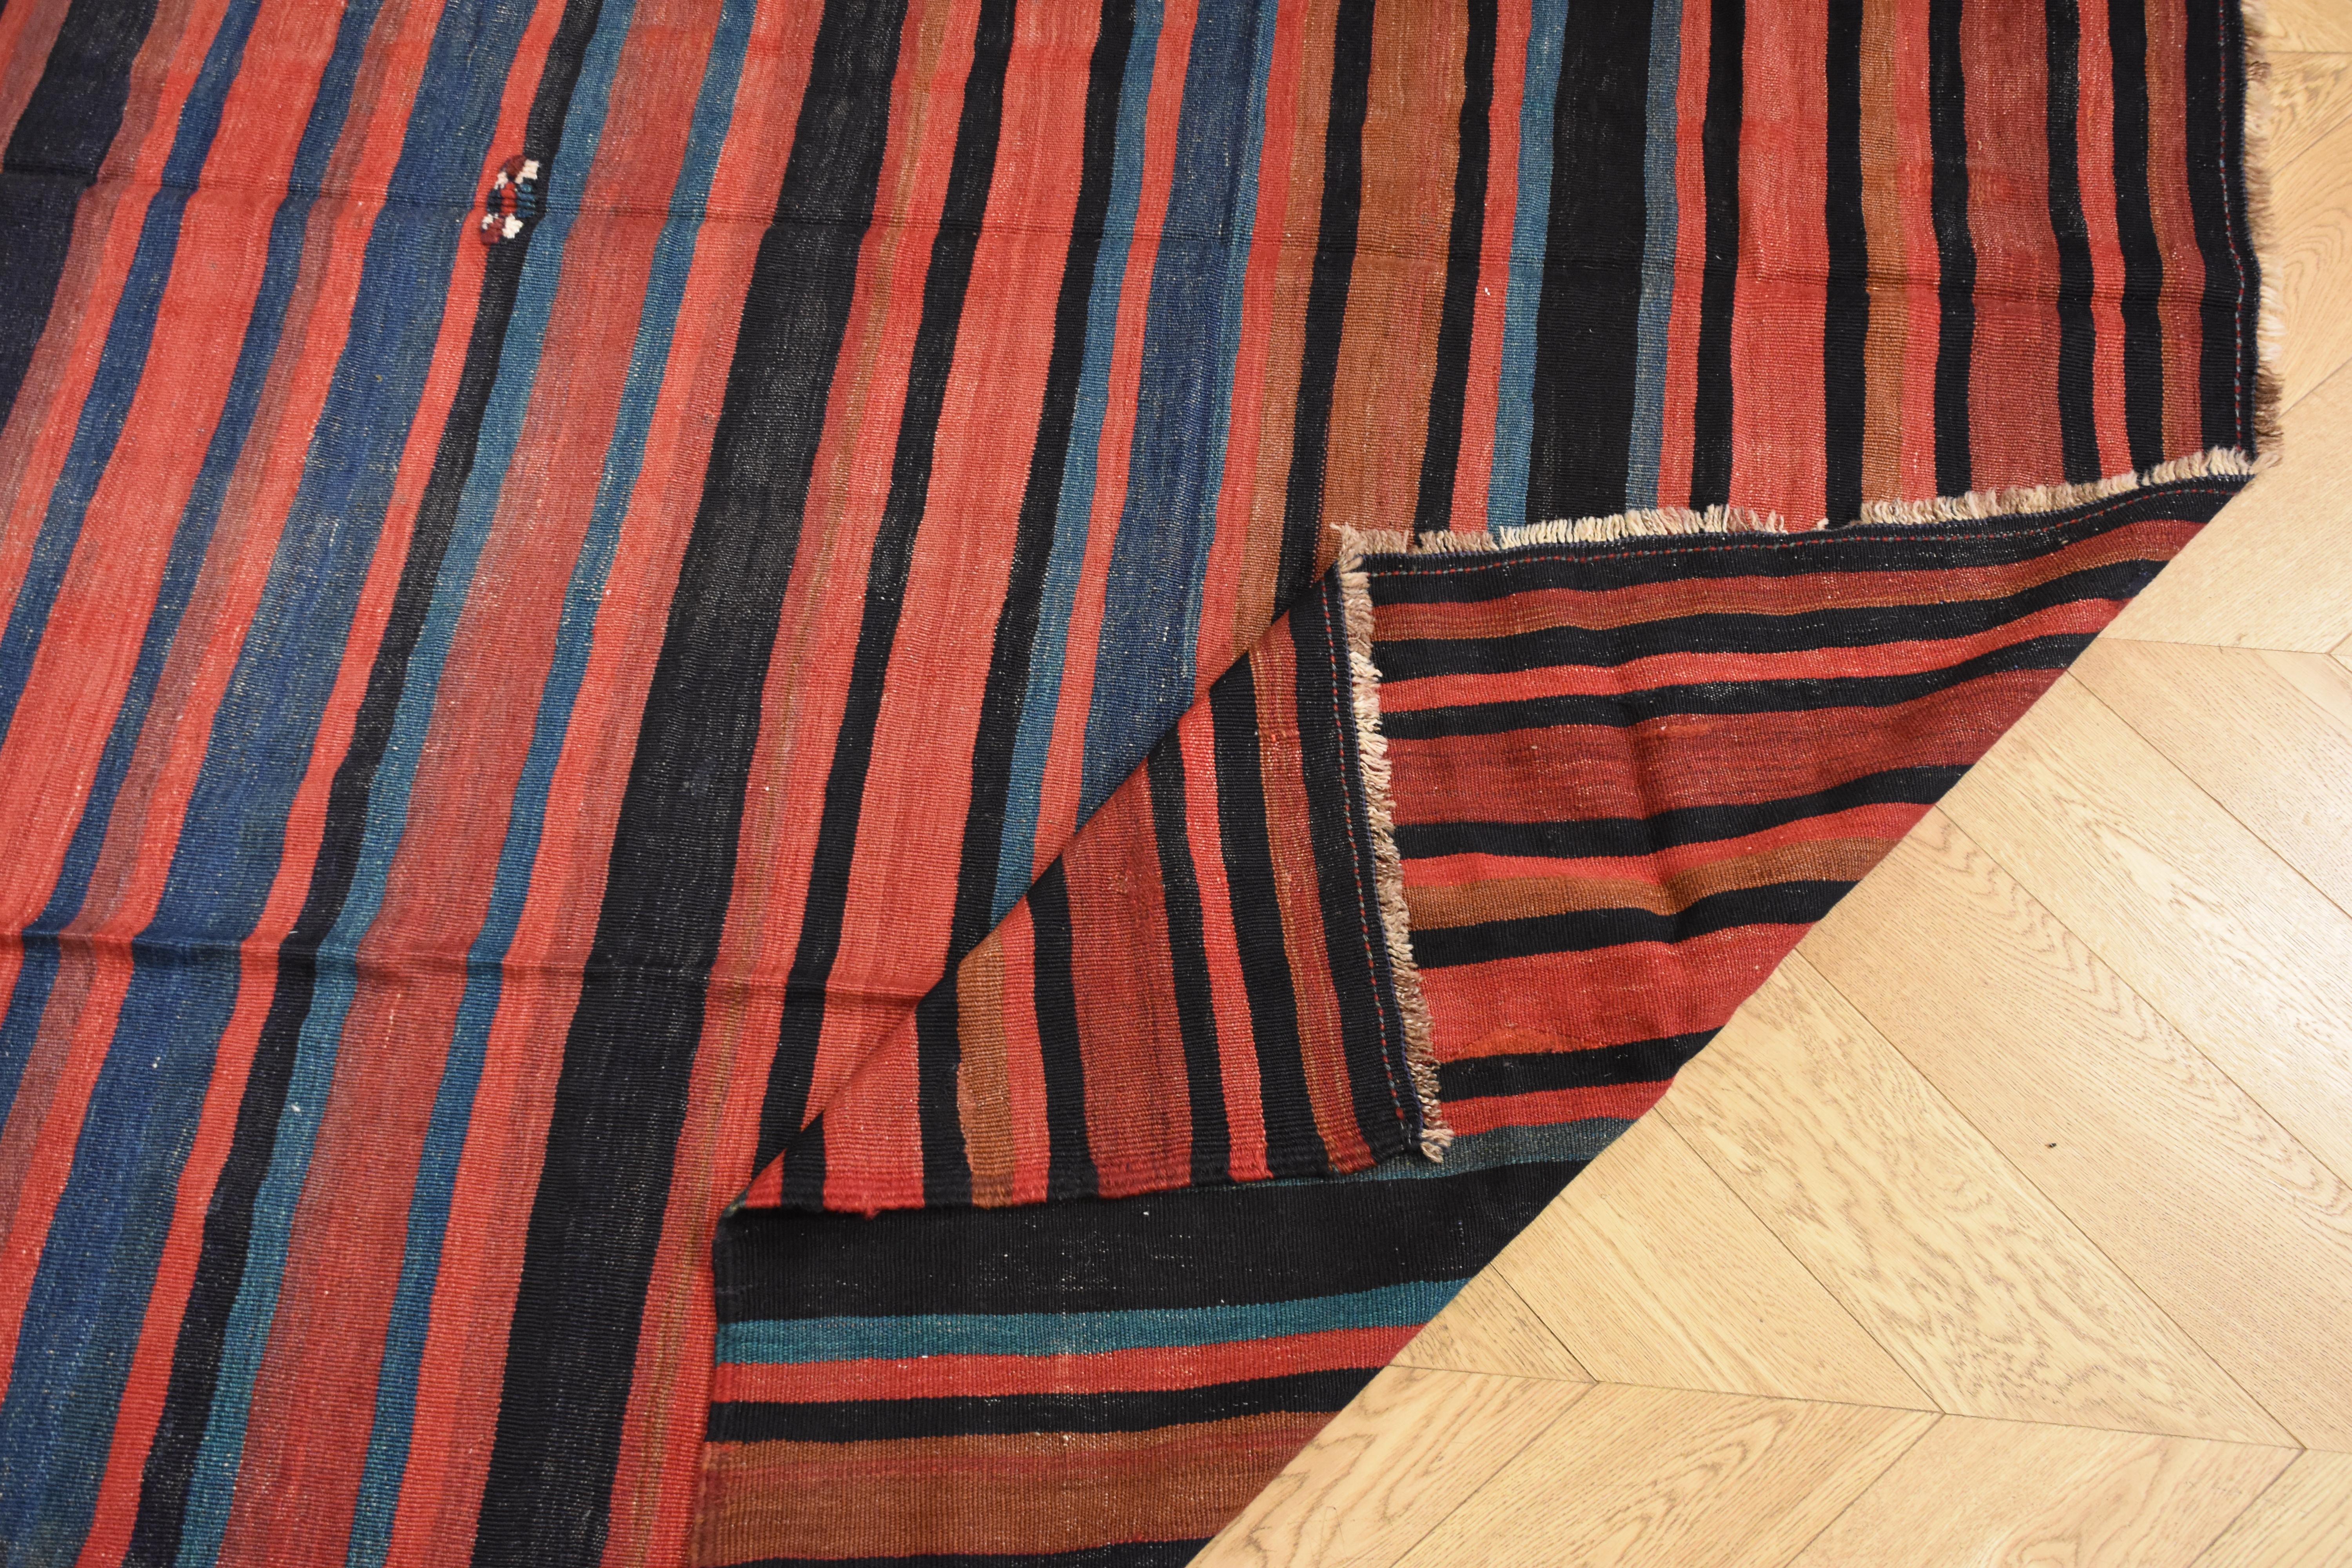 The Kilim is a rug without fur, woven like a tapestry, with only warp and weft. It is a typical product of nomadic populations, which use these artifacts for their daily use, as a couch, to delineate the spaces inside the tent and as a cover to